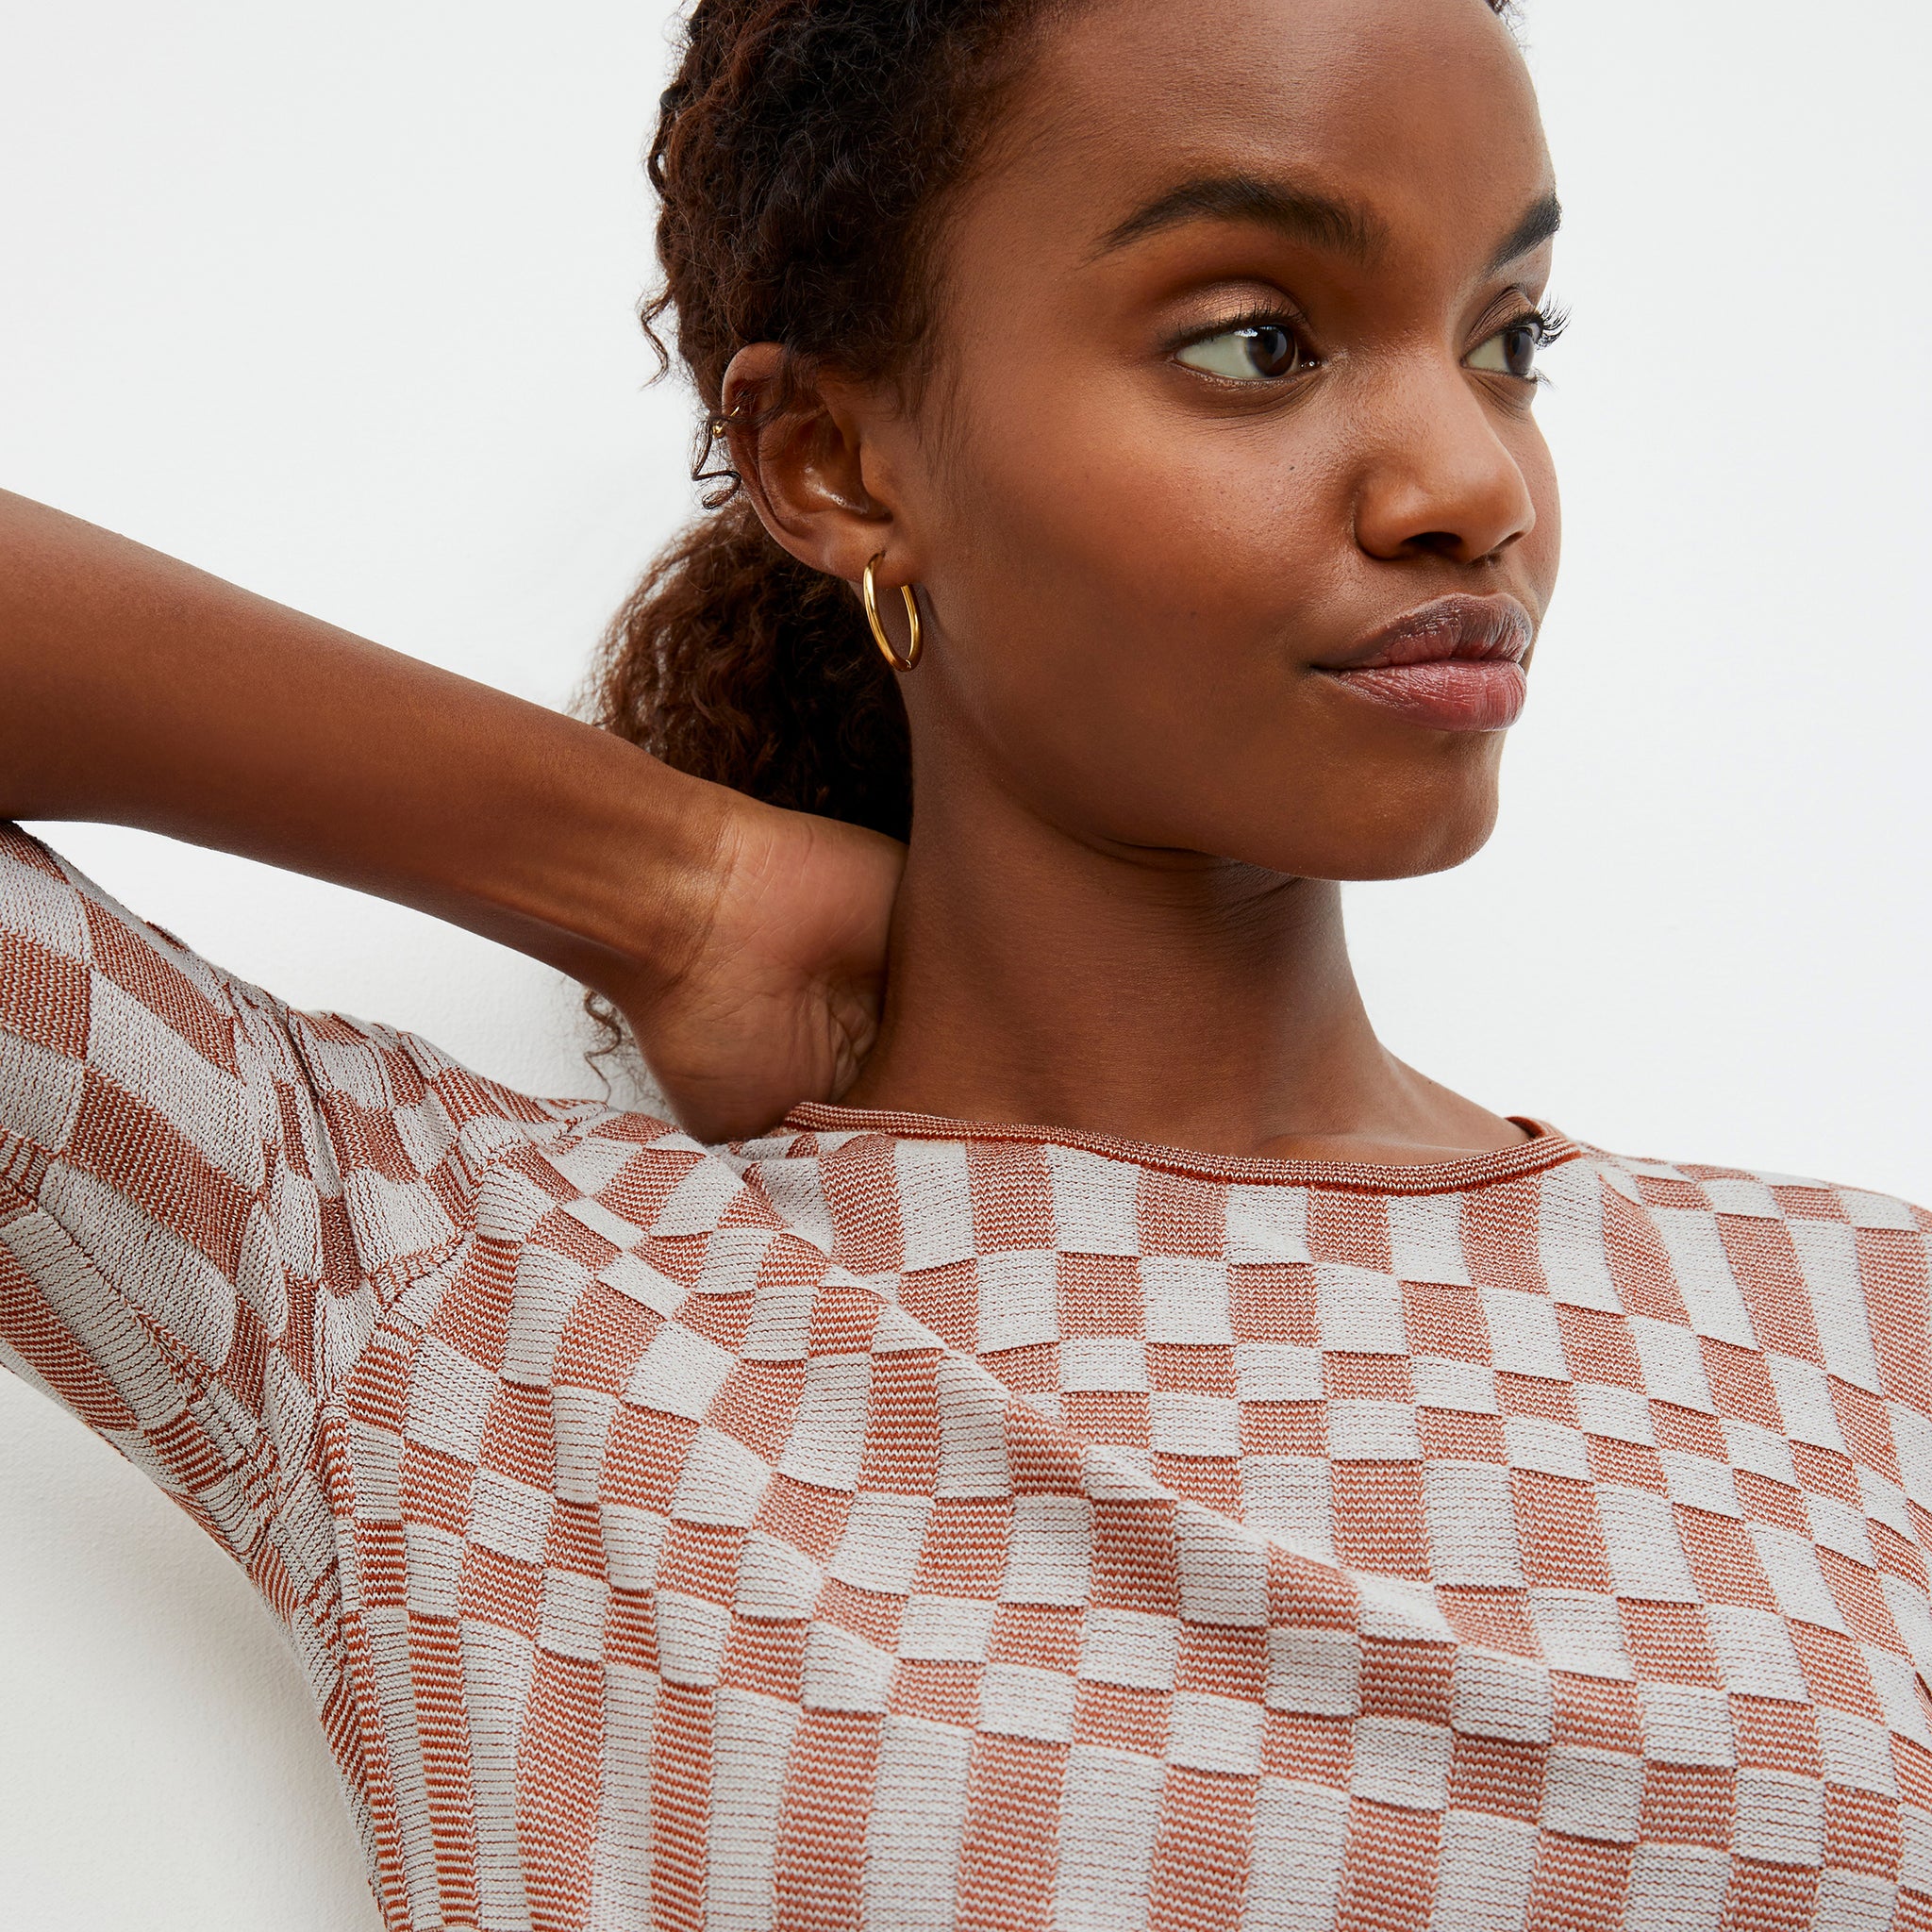 Detail image of a woman wearing the Charli Top - Checkered Knit in Red Clay / Natural